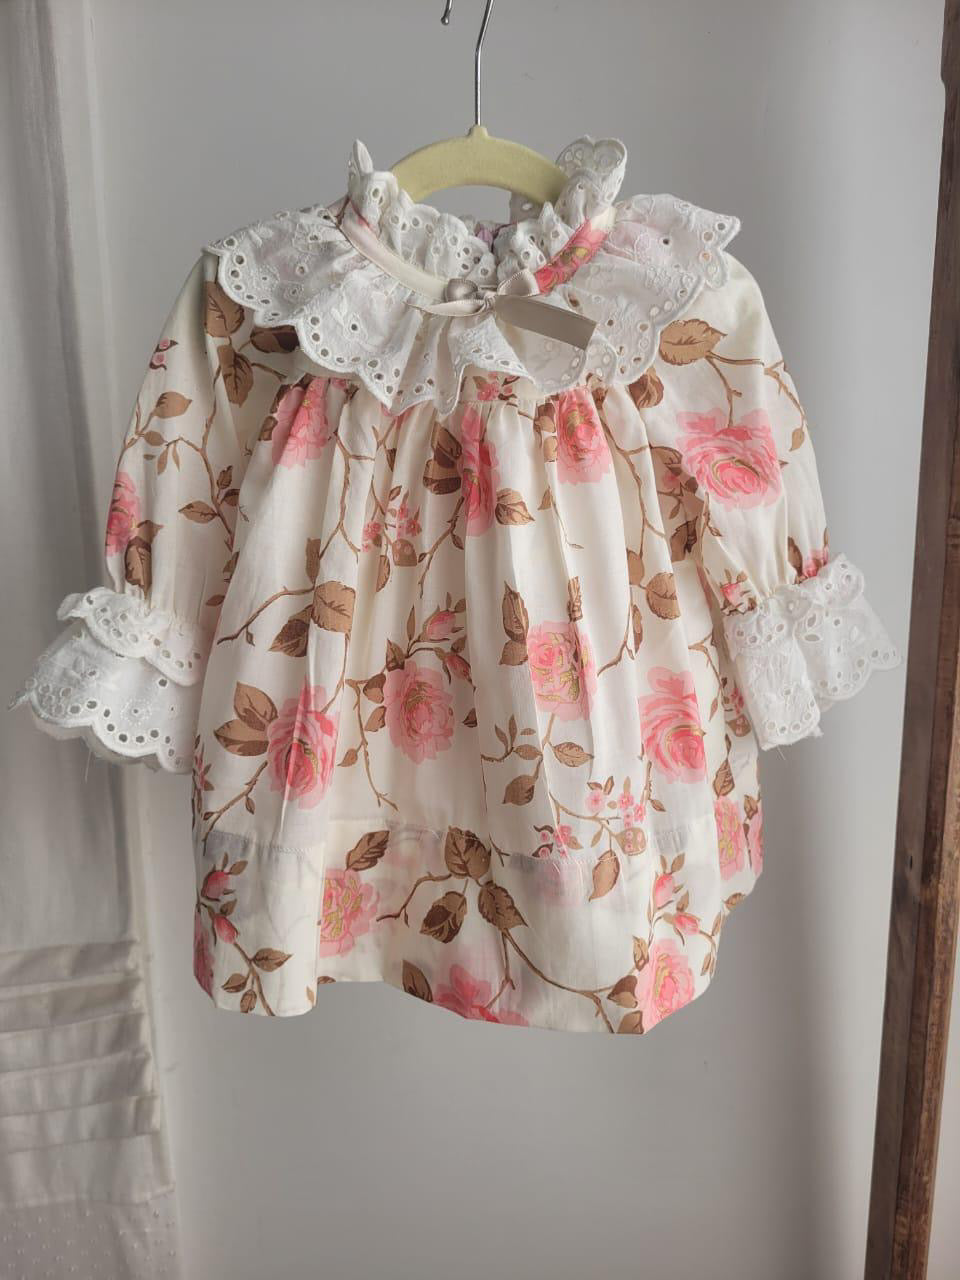 Fall Floral Lace Collar Dress, 12M to 8T.